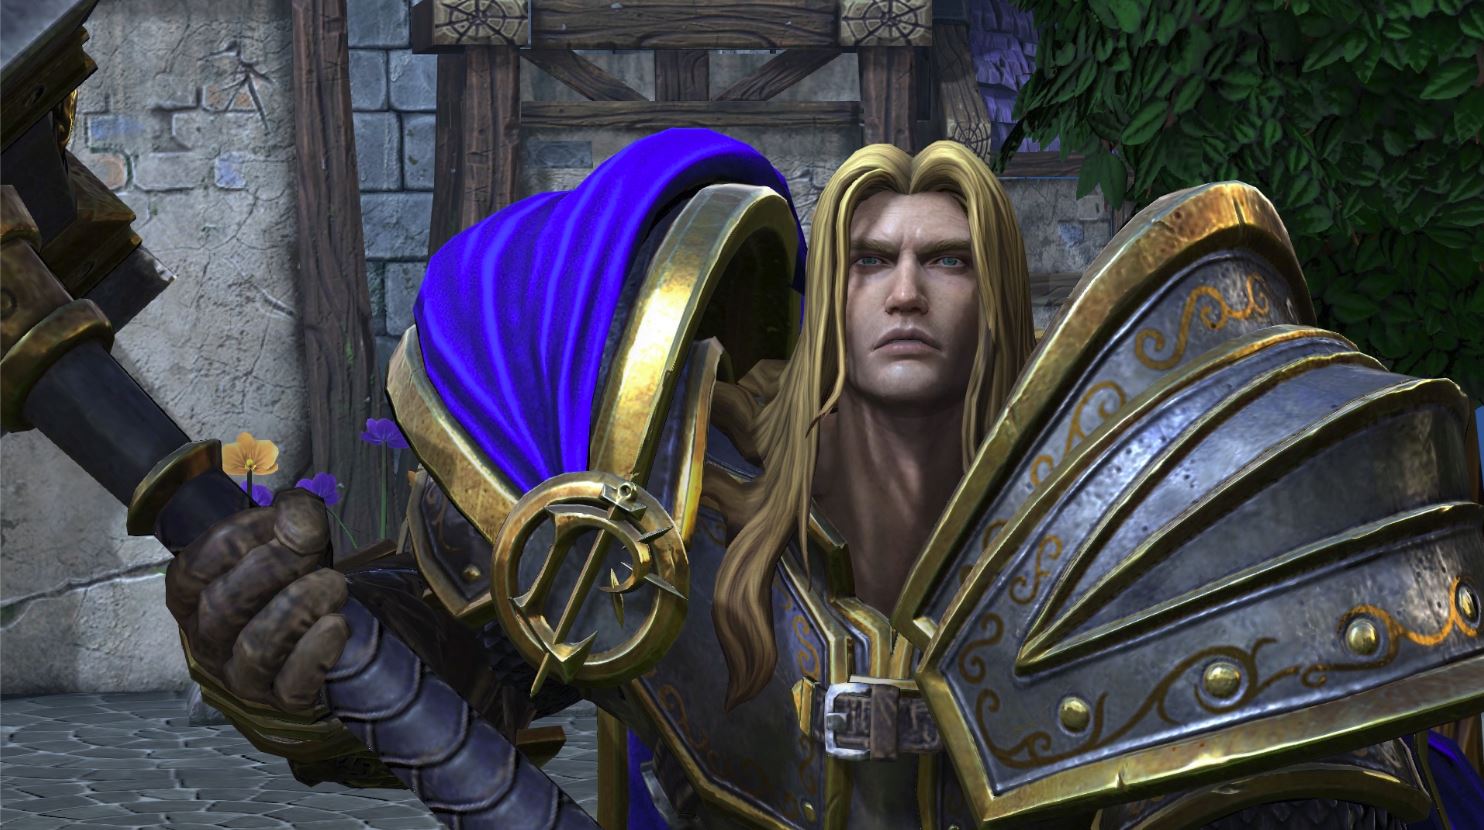 Blizzard to Retcon Lore in Warcraft III Remaster to Better Follow Retcons in World of Warcraft